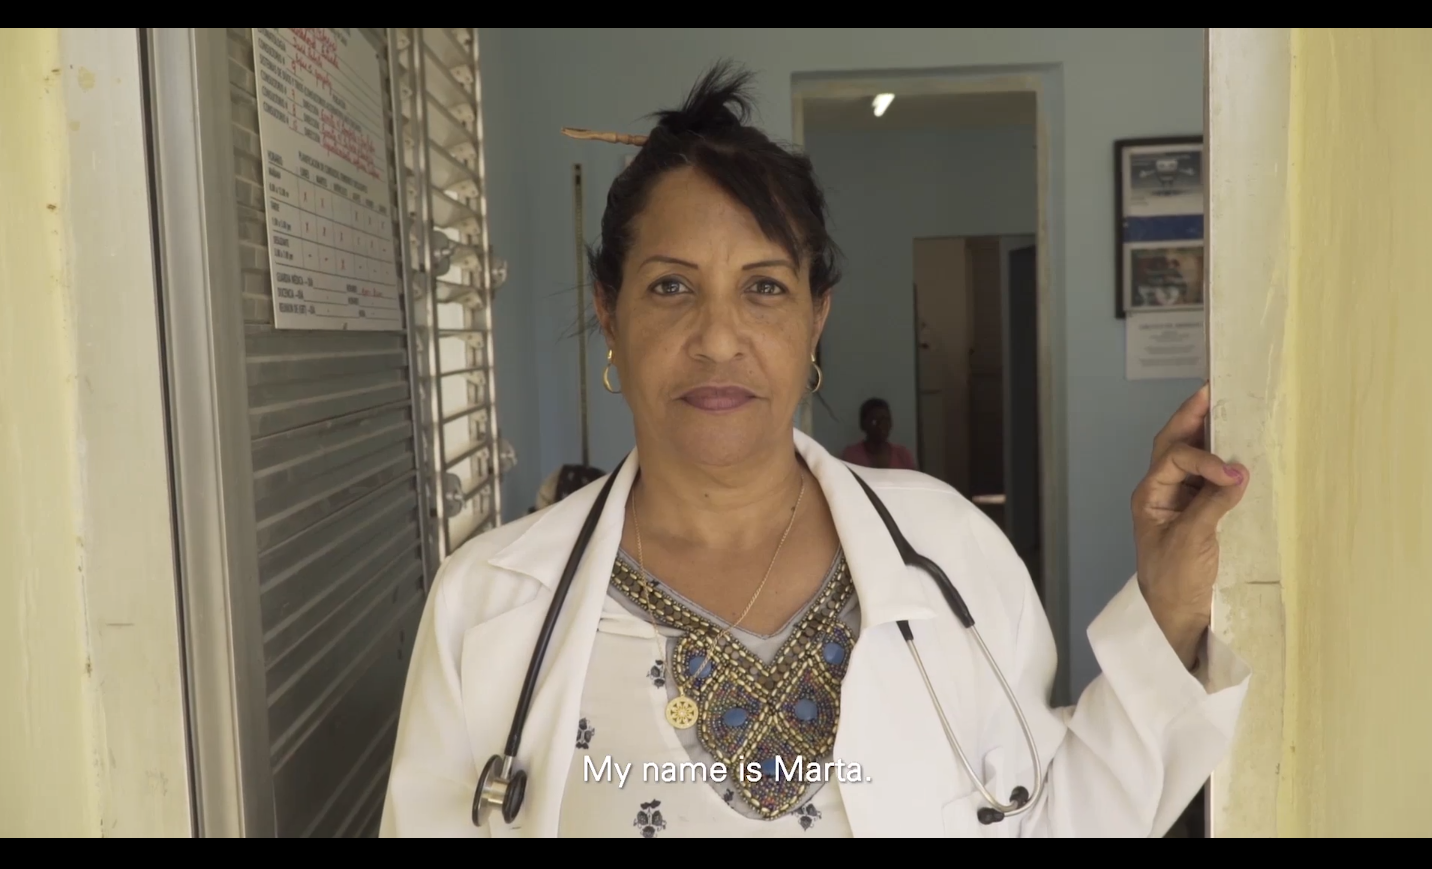 What is a day in the life of a Cuban family doctor like? Watch our short film